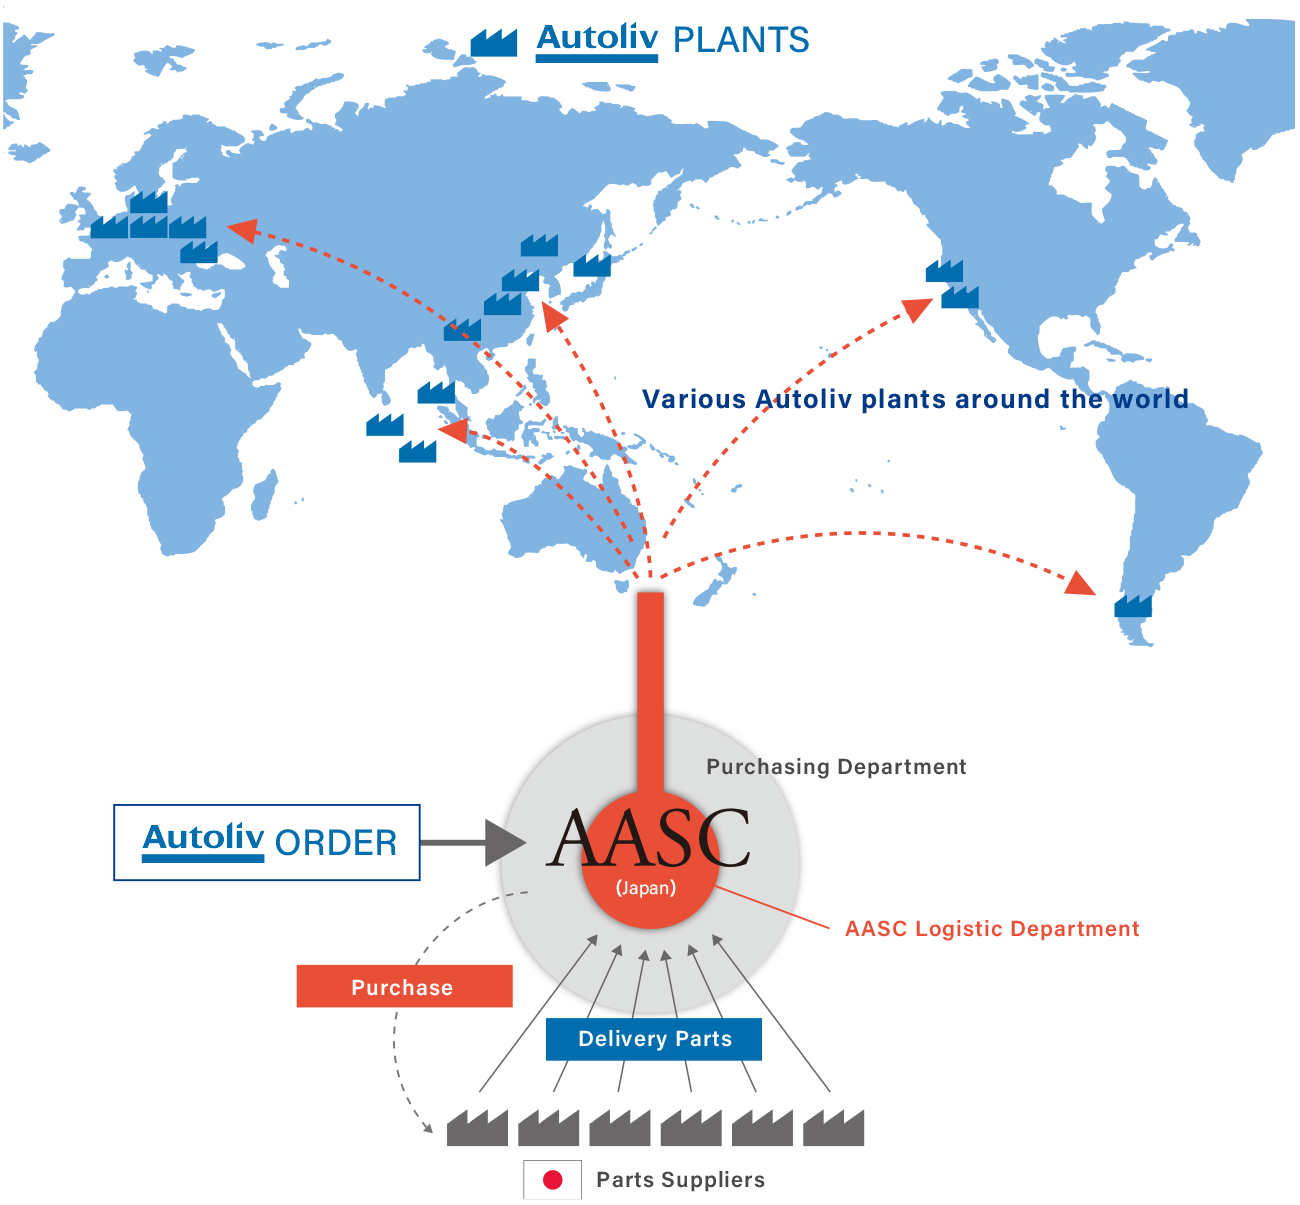 The parts ordered from Autolive are purchased and procured from the parts maker by the purchasing department of AASC (Japan), and the parts maker delivers the parts. The parts will be delivered to Autoliv plants around the world through AASC's logistics department.